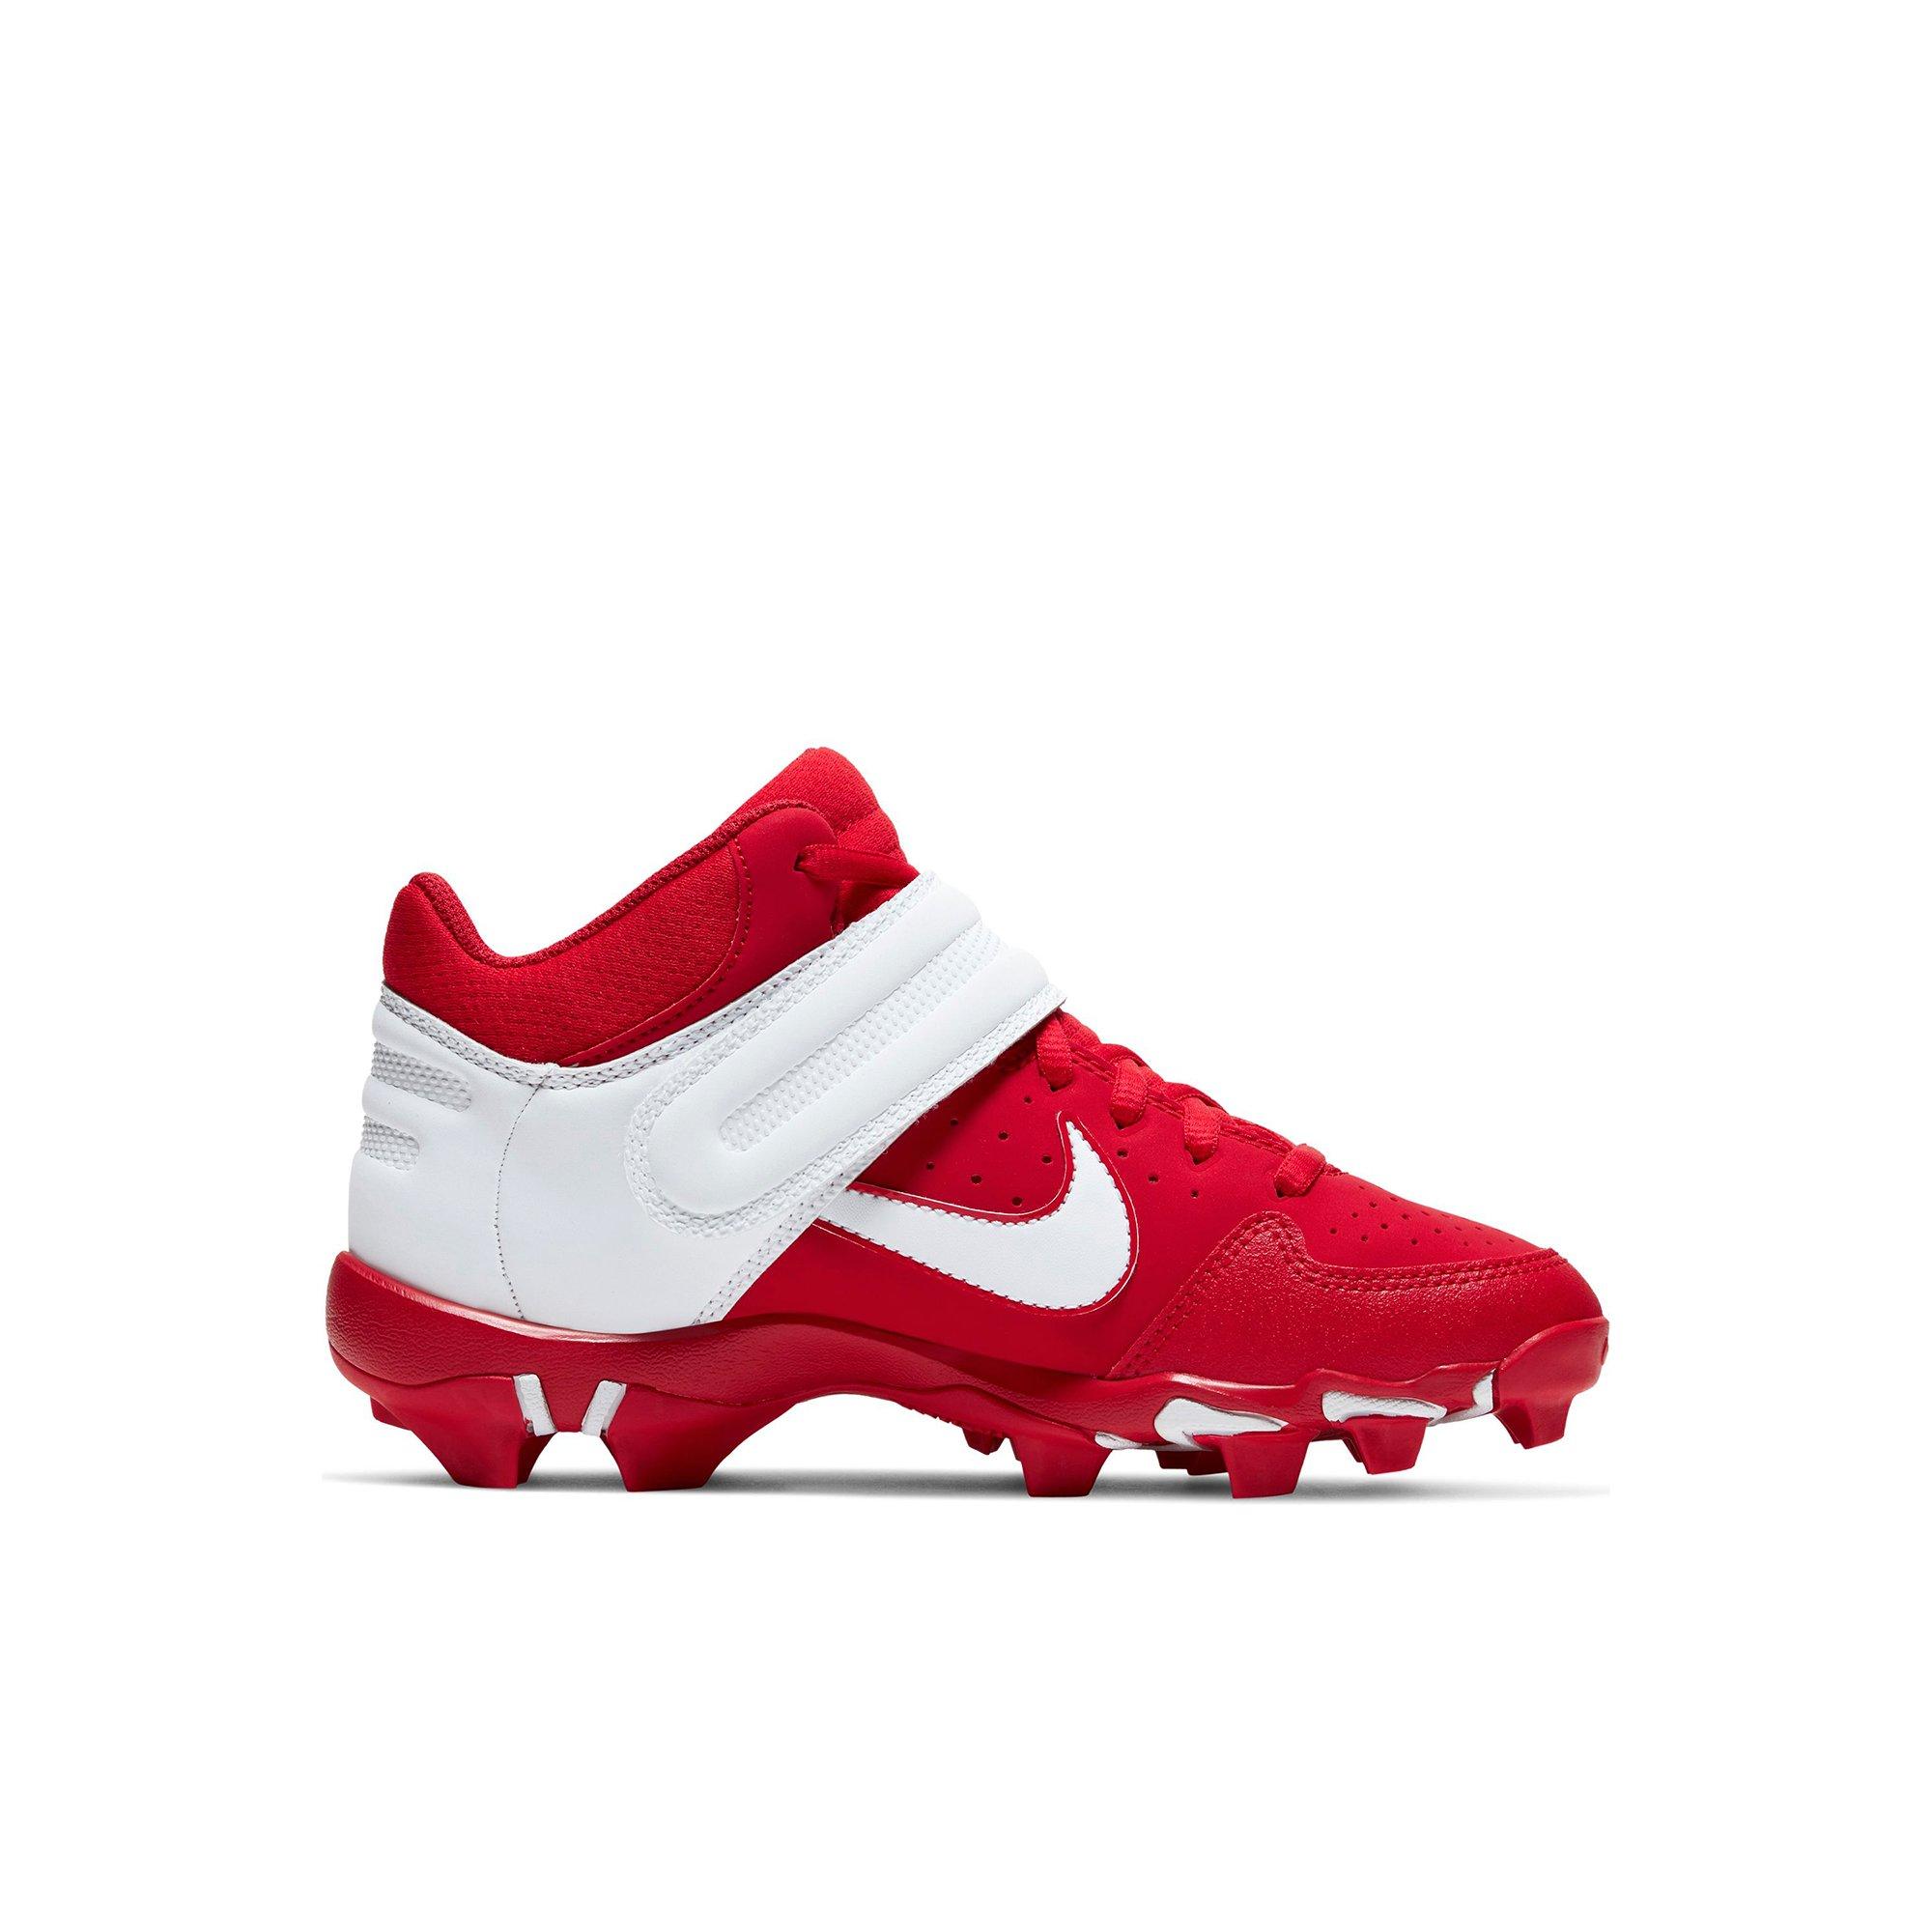 red and white nike baseball cleats